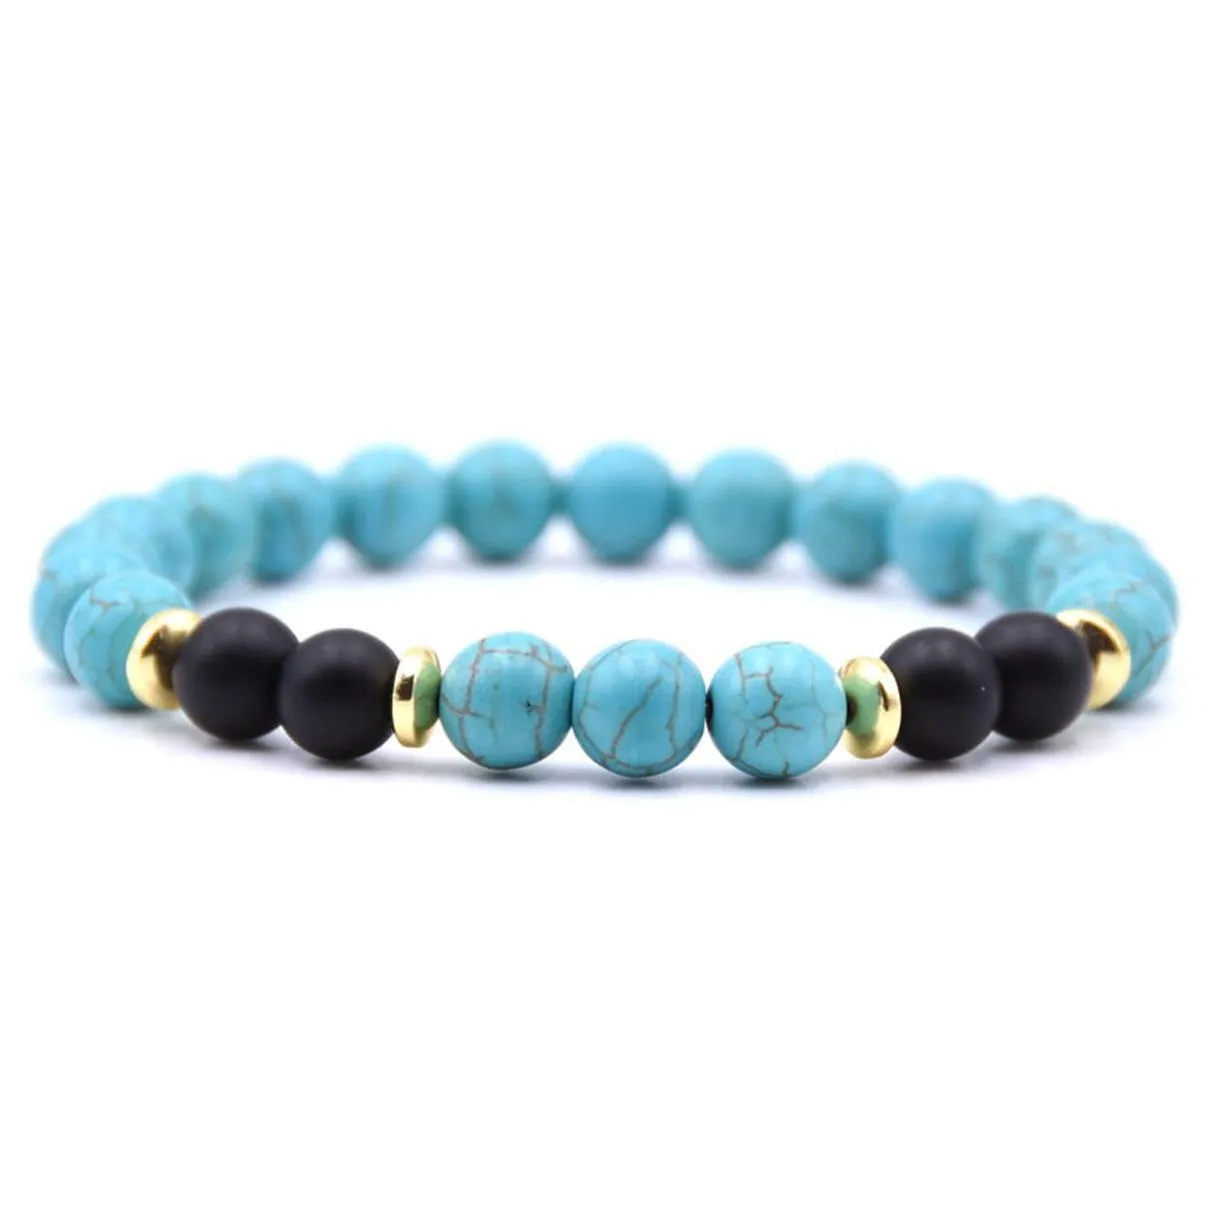 Stone bracelet with any four matte black agate men and women fashion accessories